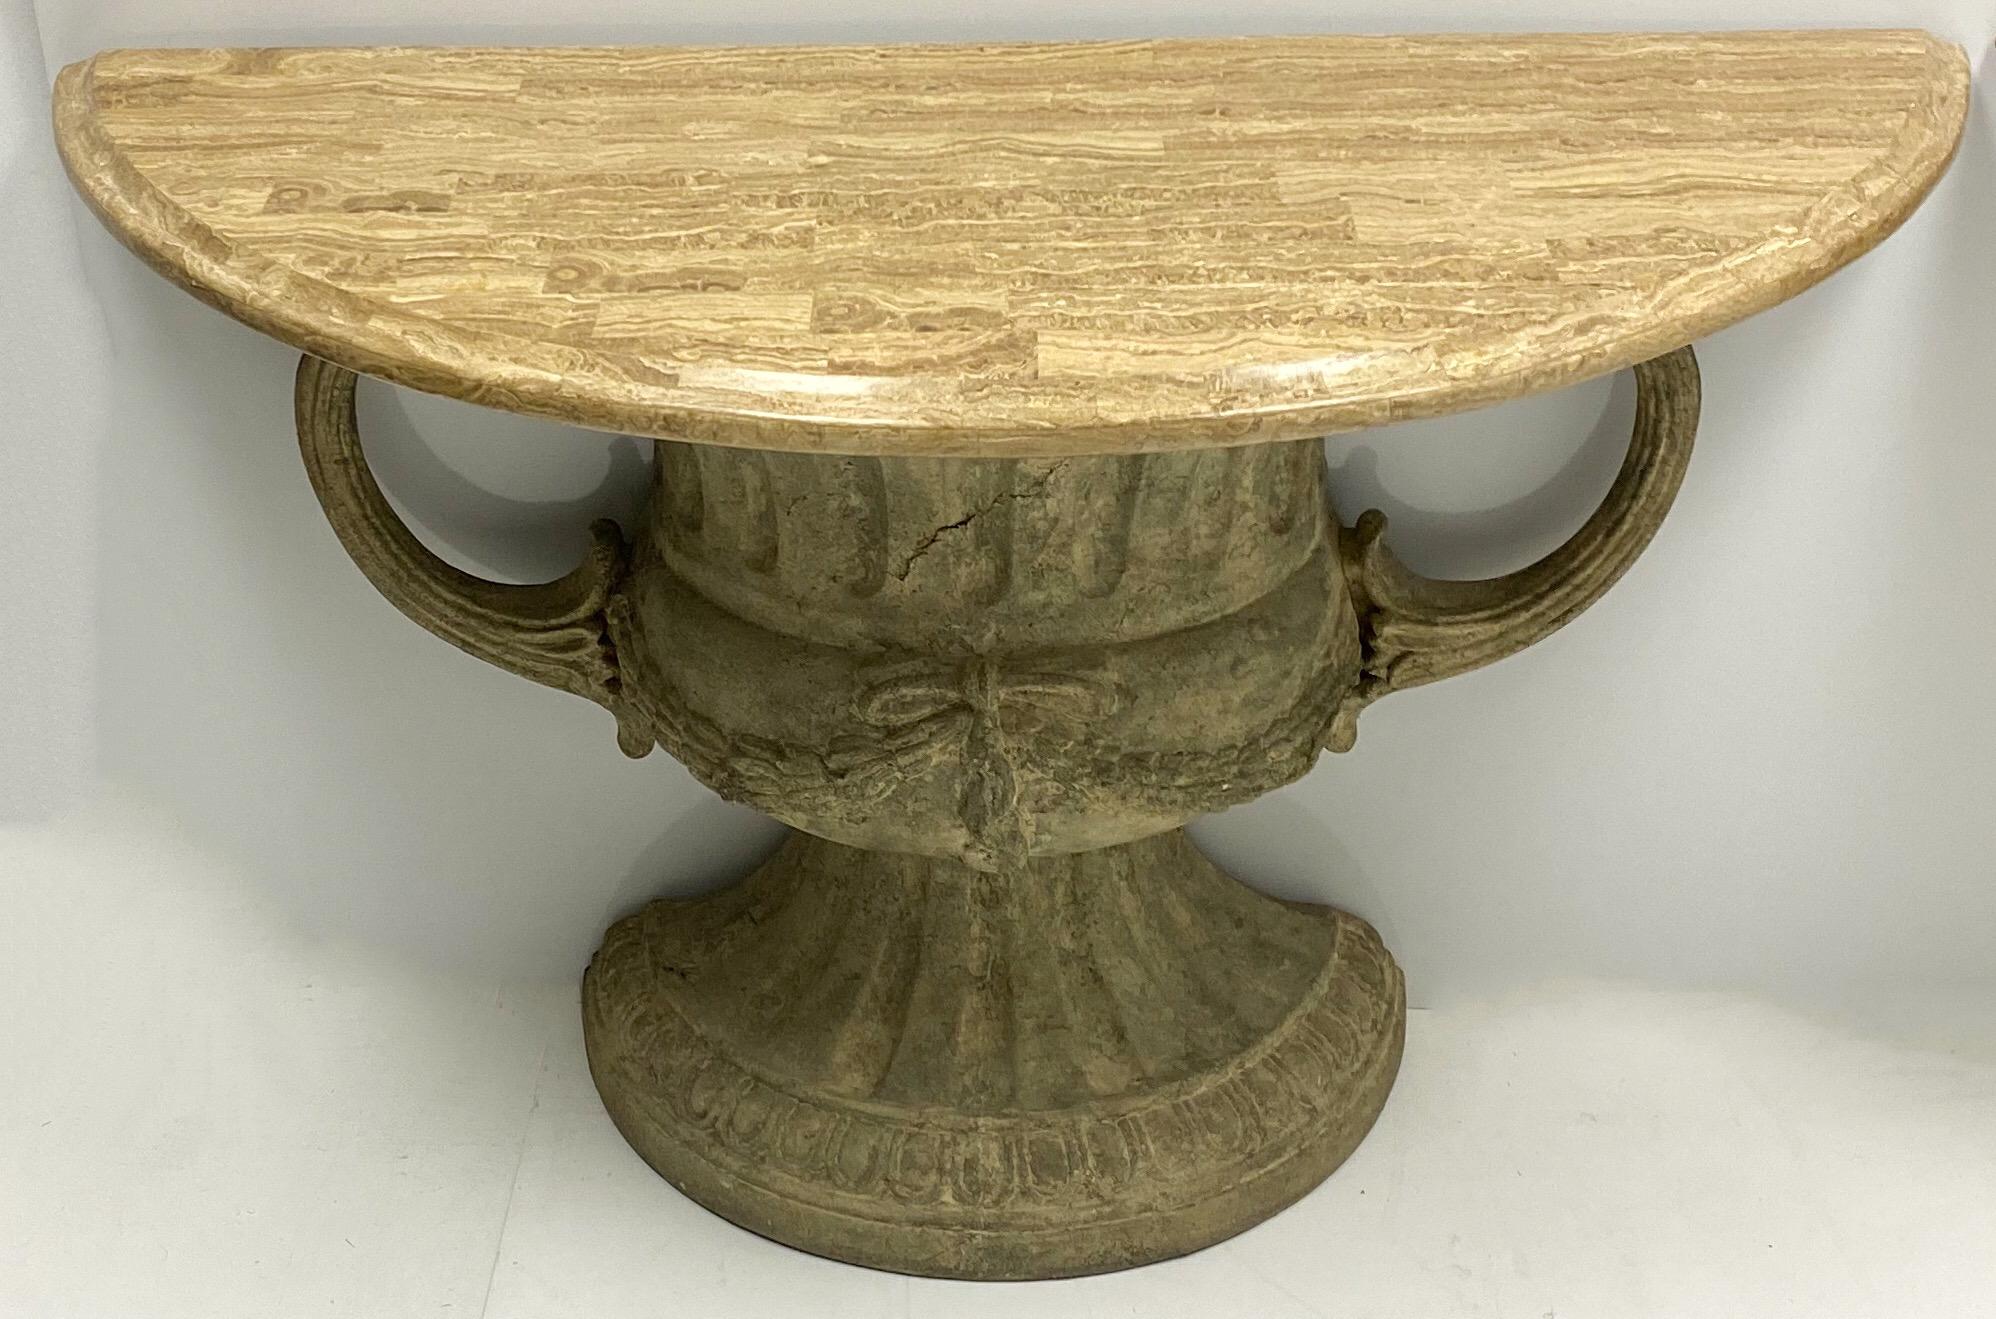 This is a pair of neoclassical style urn form console tables with attached tessellated marble tops. They have intentional distressing. The body is cast fiberglass. They are unmarked and in very good condition.